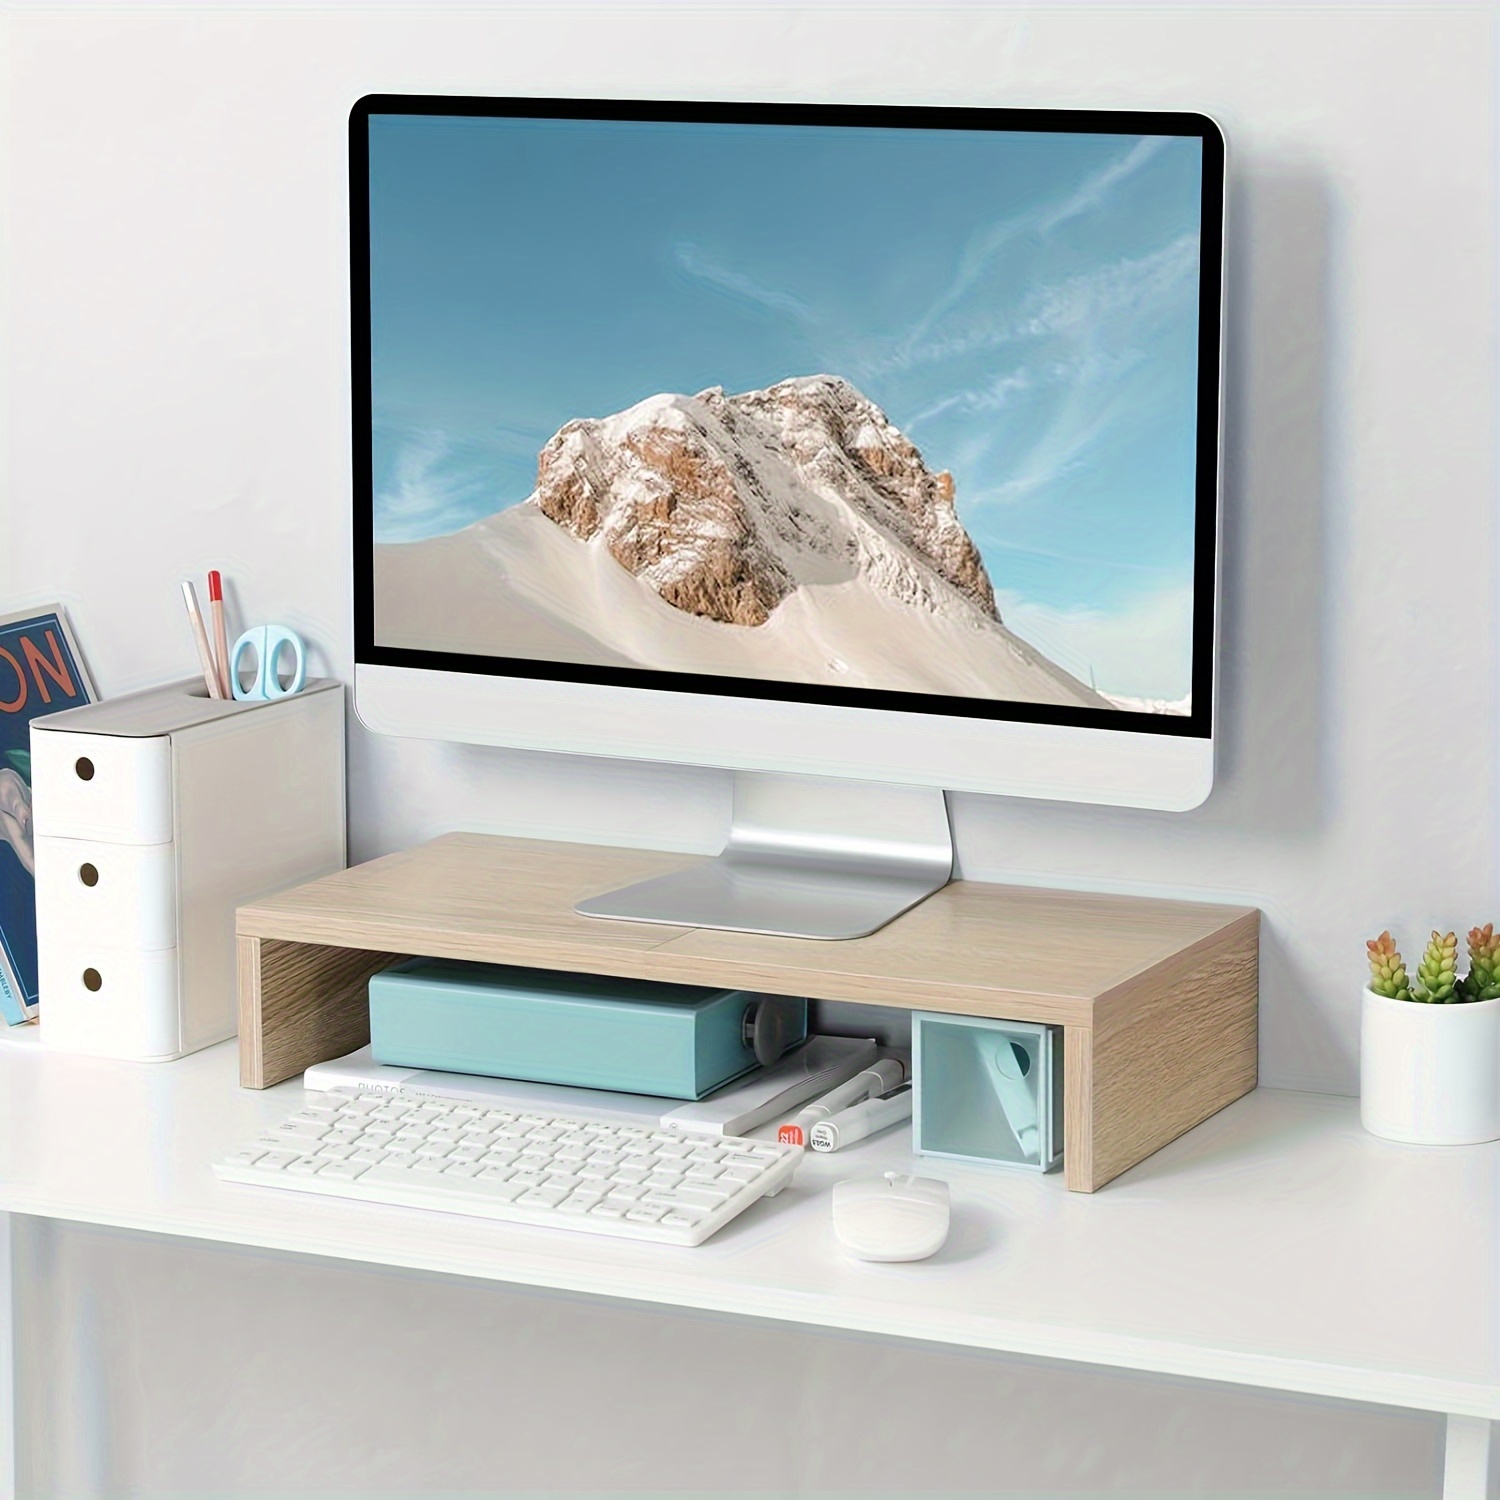 

Monitor Stand Riser, Wood Monitor Stand For Desk, Tv/screen/pc/printer/laptop Riser, Computer Stand With Keyboard Organizer Desktop Stand, Monitor Riser